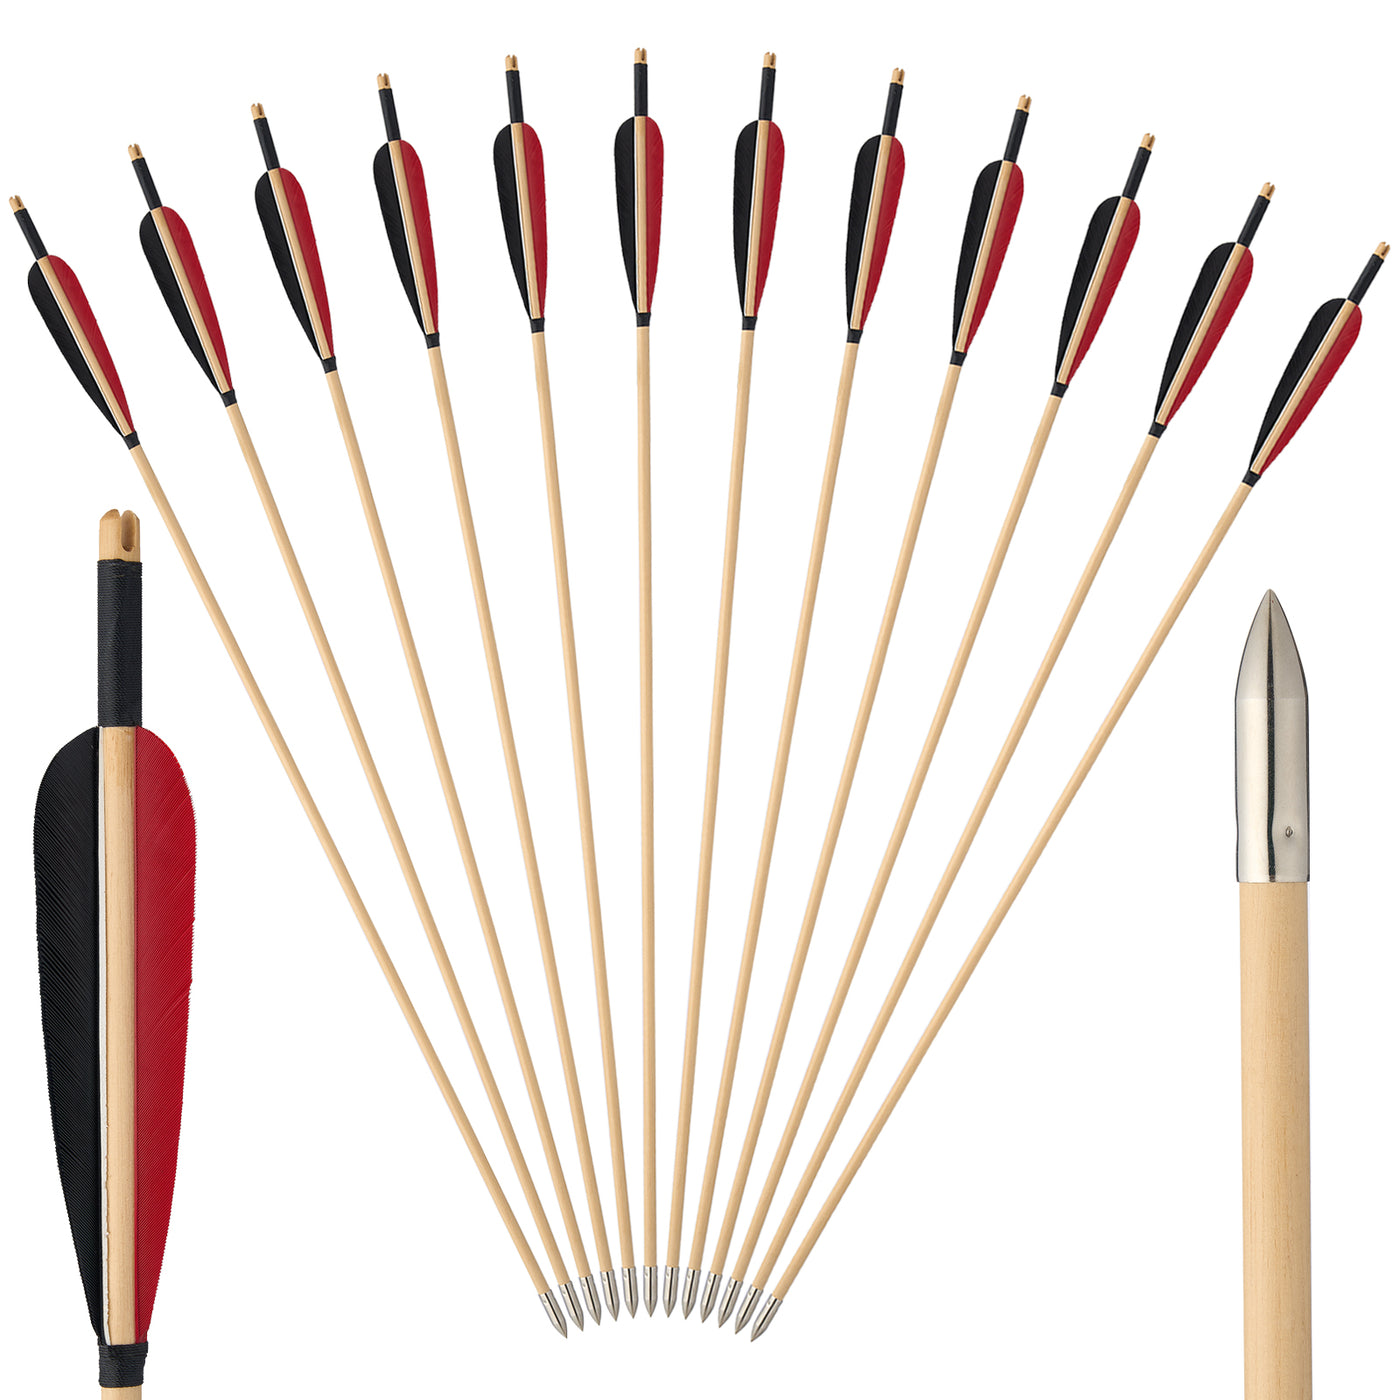 12x 32" OD 8mm Fletched Trad Archery Wooden Arrows 5in Black/Red Turkey Feather Target Field Points Handmade For Recurve Bow Longbow Practice Shooting